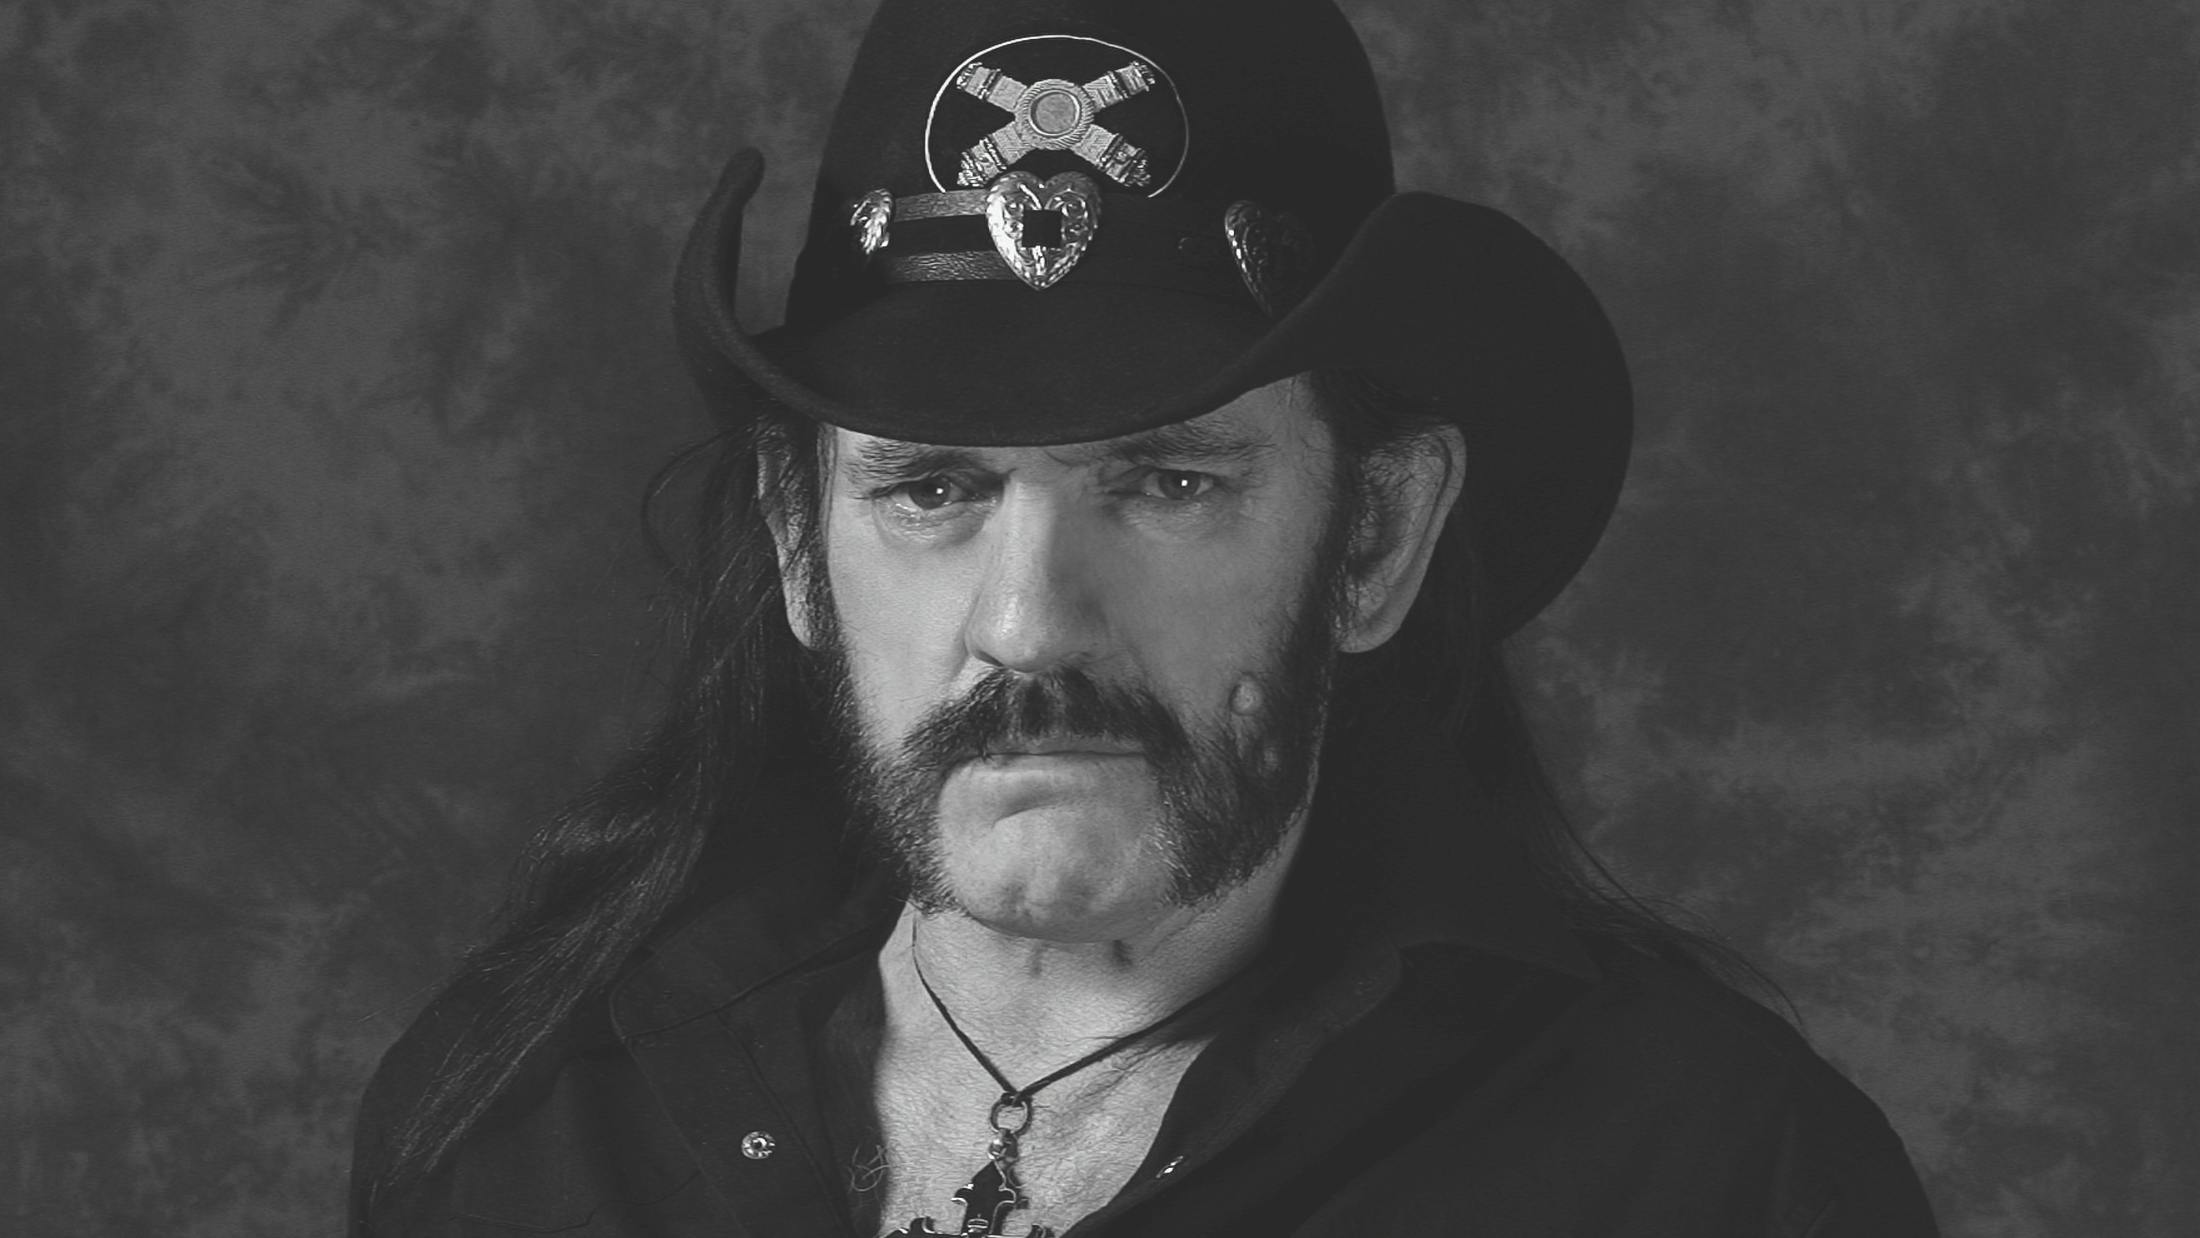 There's A New Lemmy Kilmister Biopic In The Works